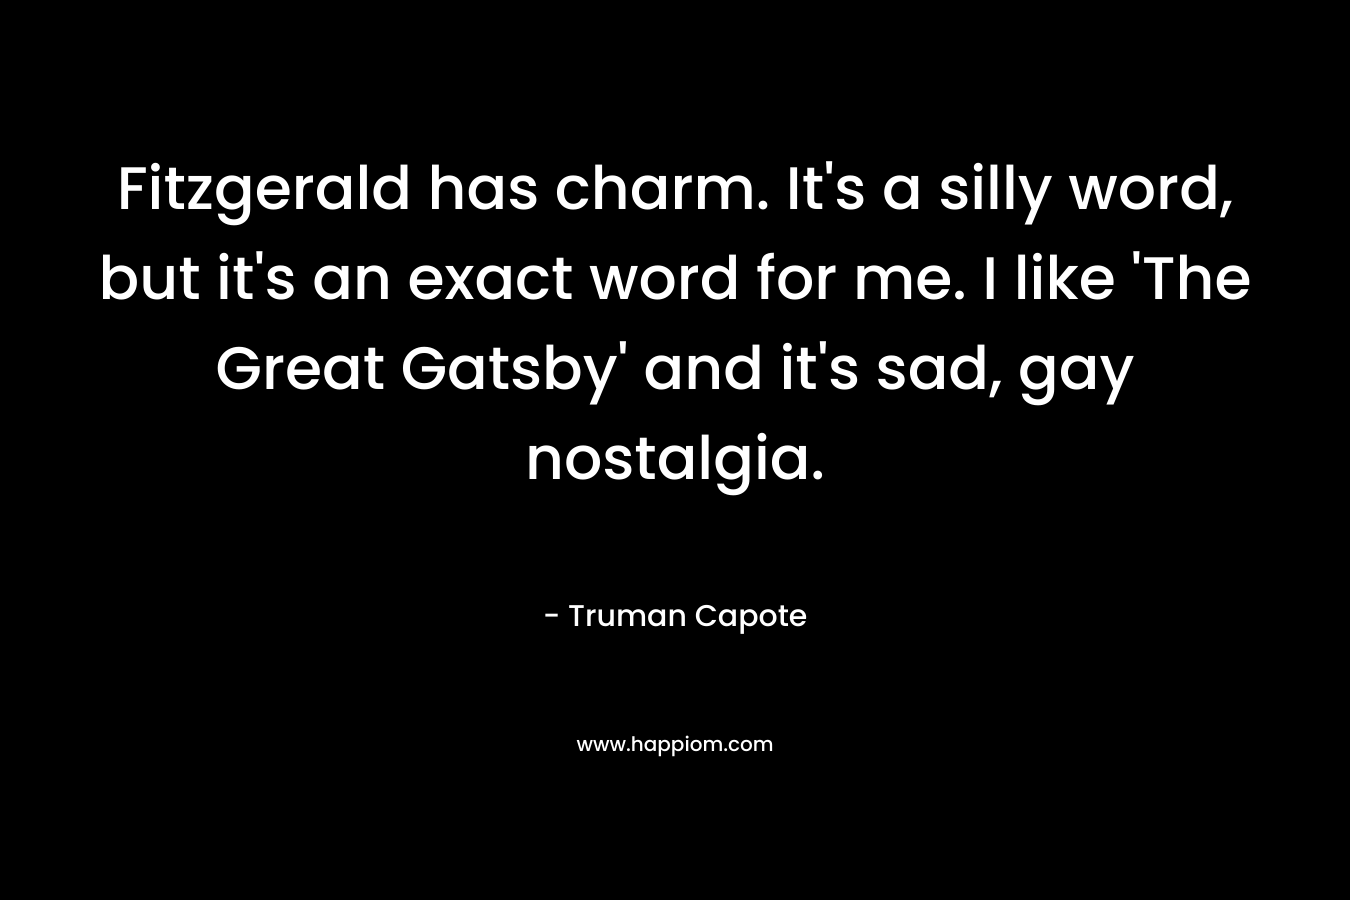 Fitzgerald has charm. It’s a silly word, but it’s an exact word for me. I like ‘The Great Gatsby’ and it’s sad, gay nostalgia. – Truman Capote